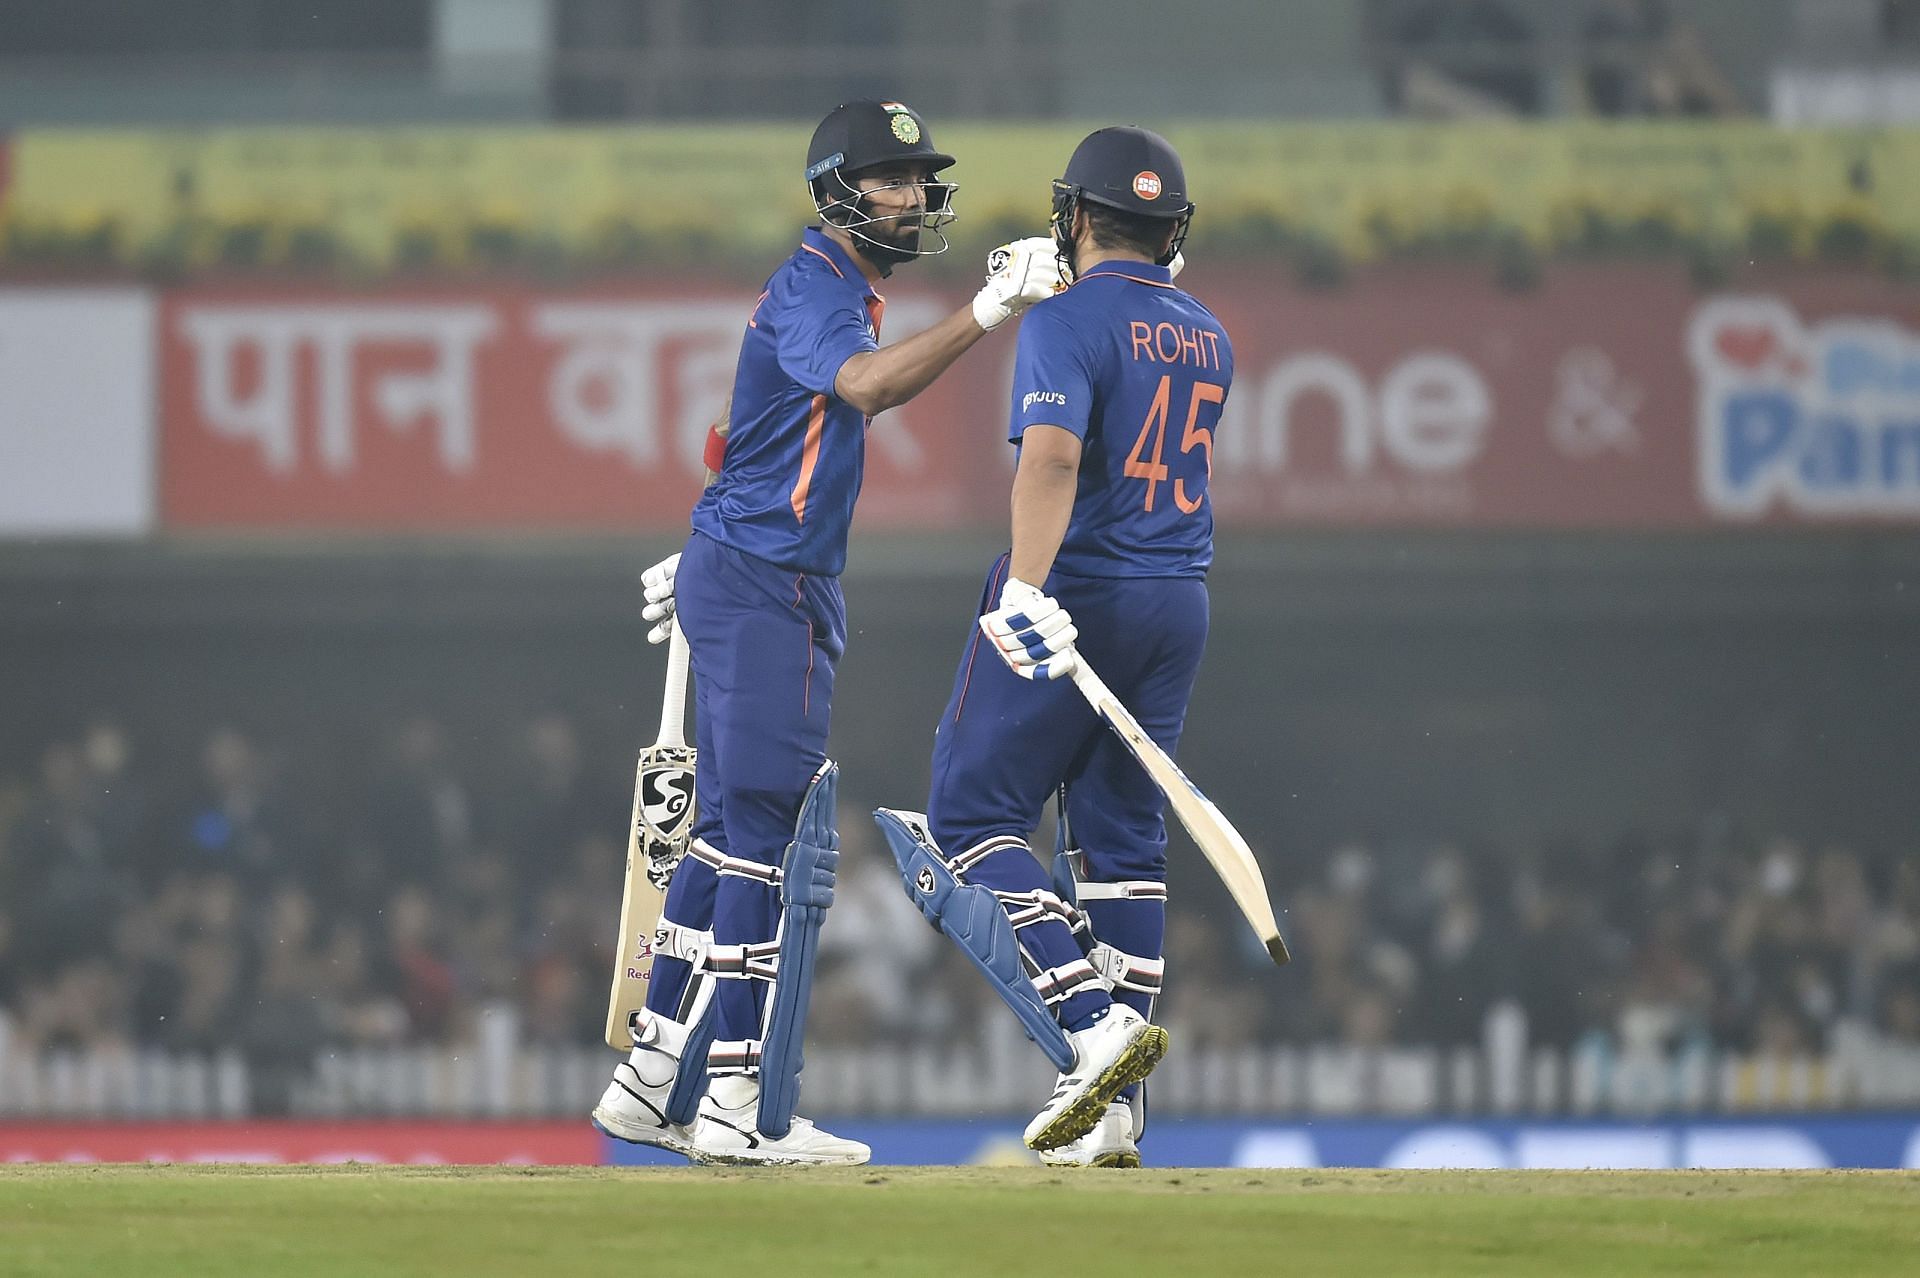 Aakash Chopra feels the top order of both sides could have a good time.